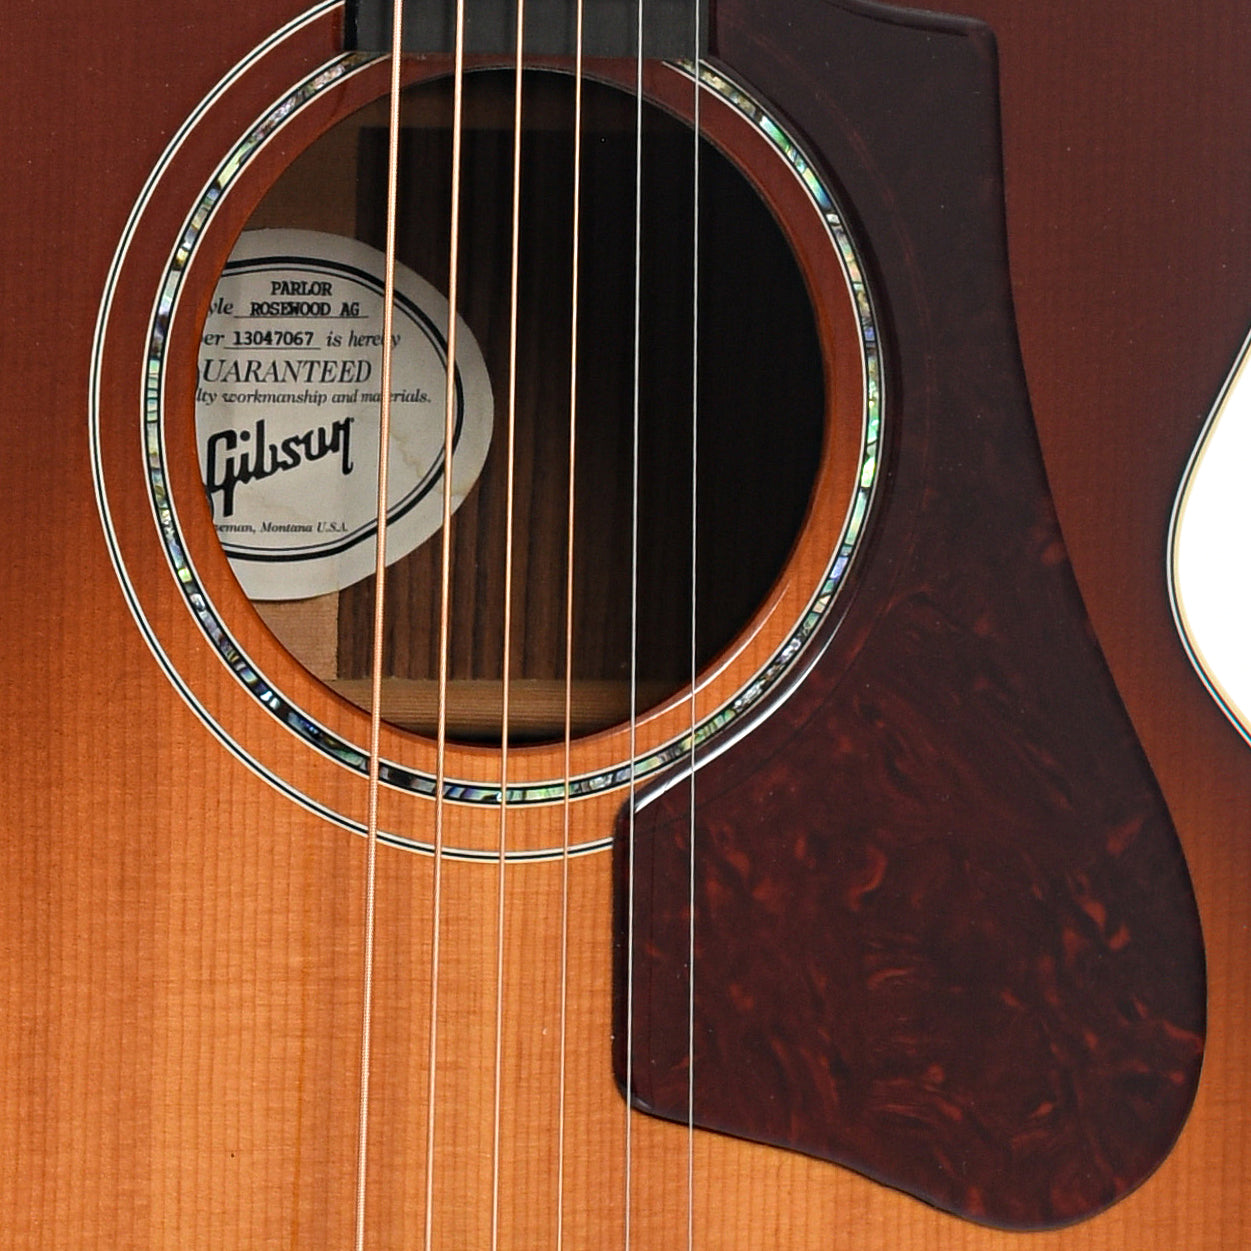 Soundhole of Gibson Parlor Rosewood AG Acoustic Guitar 